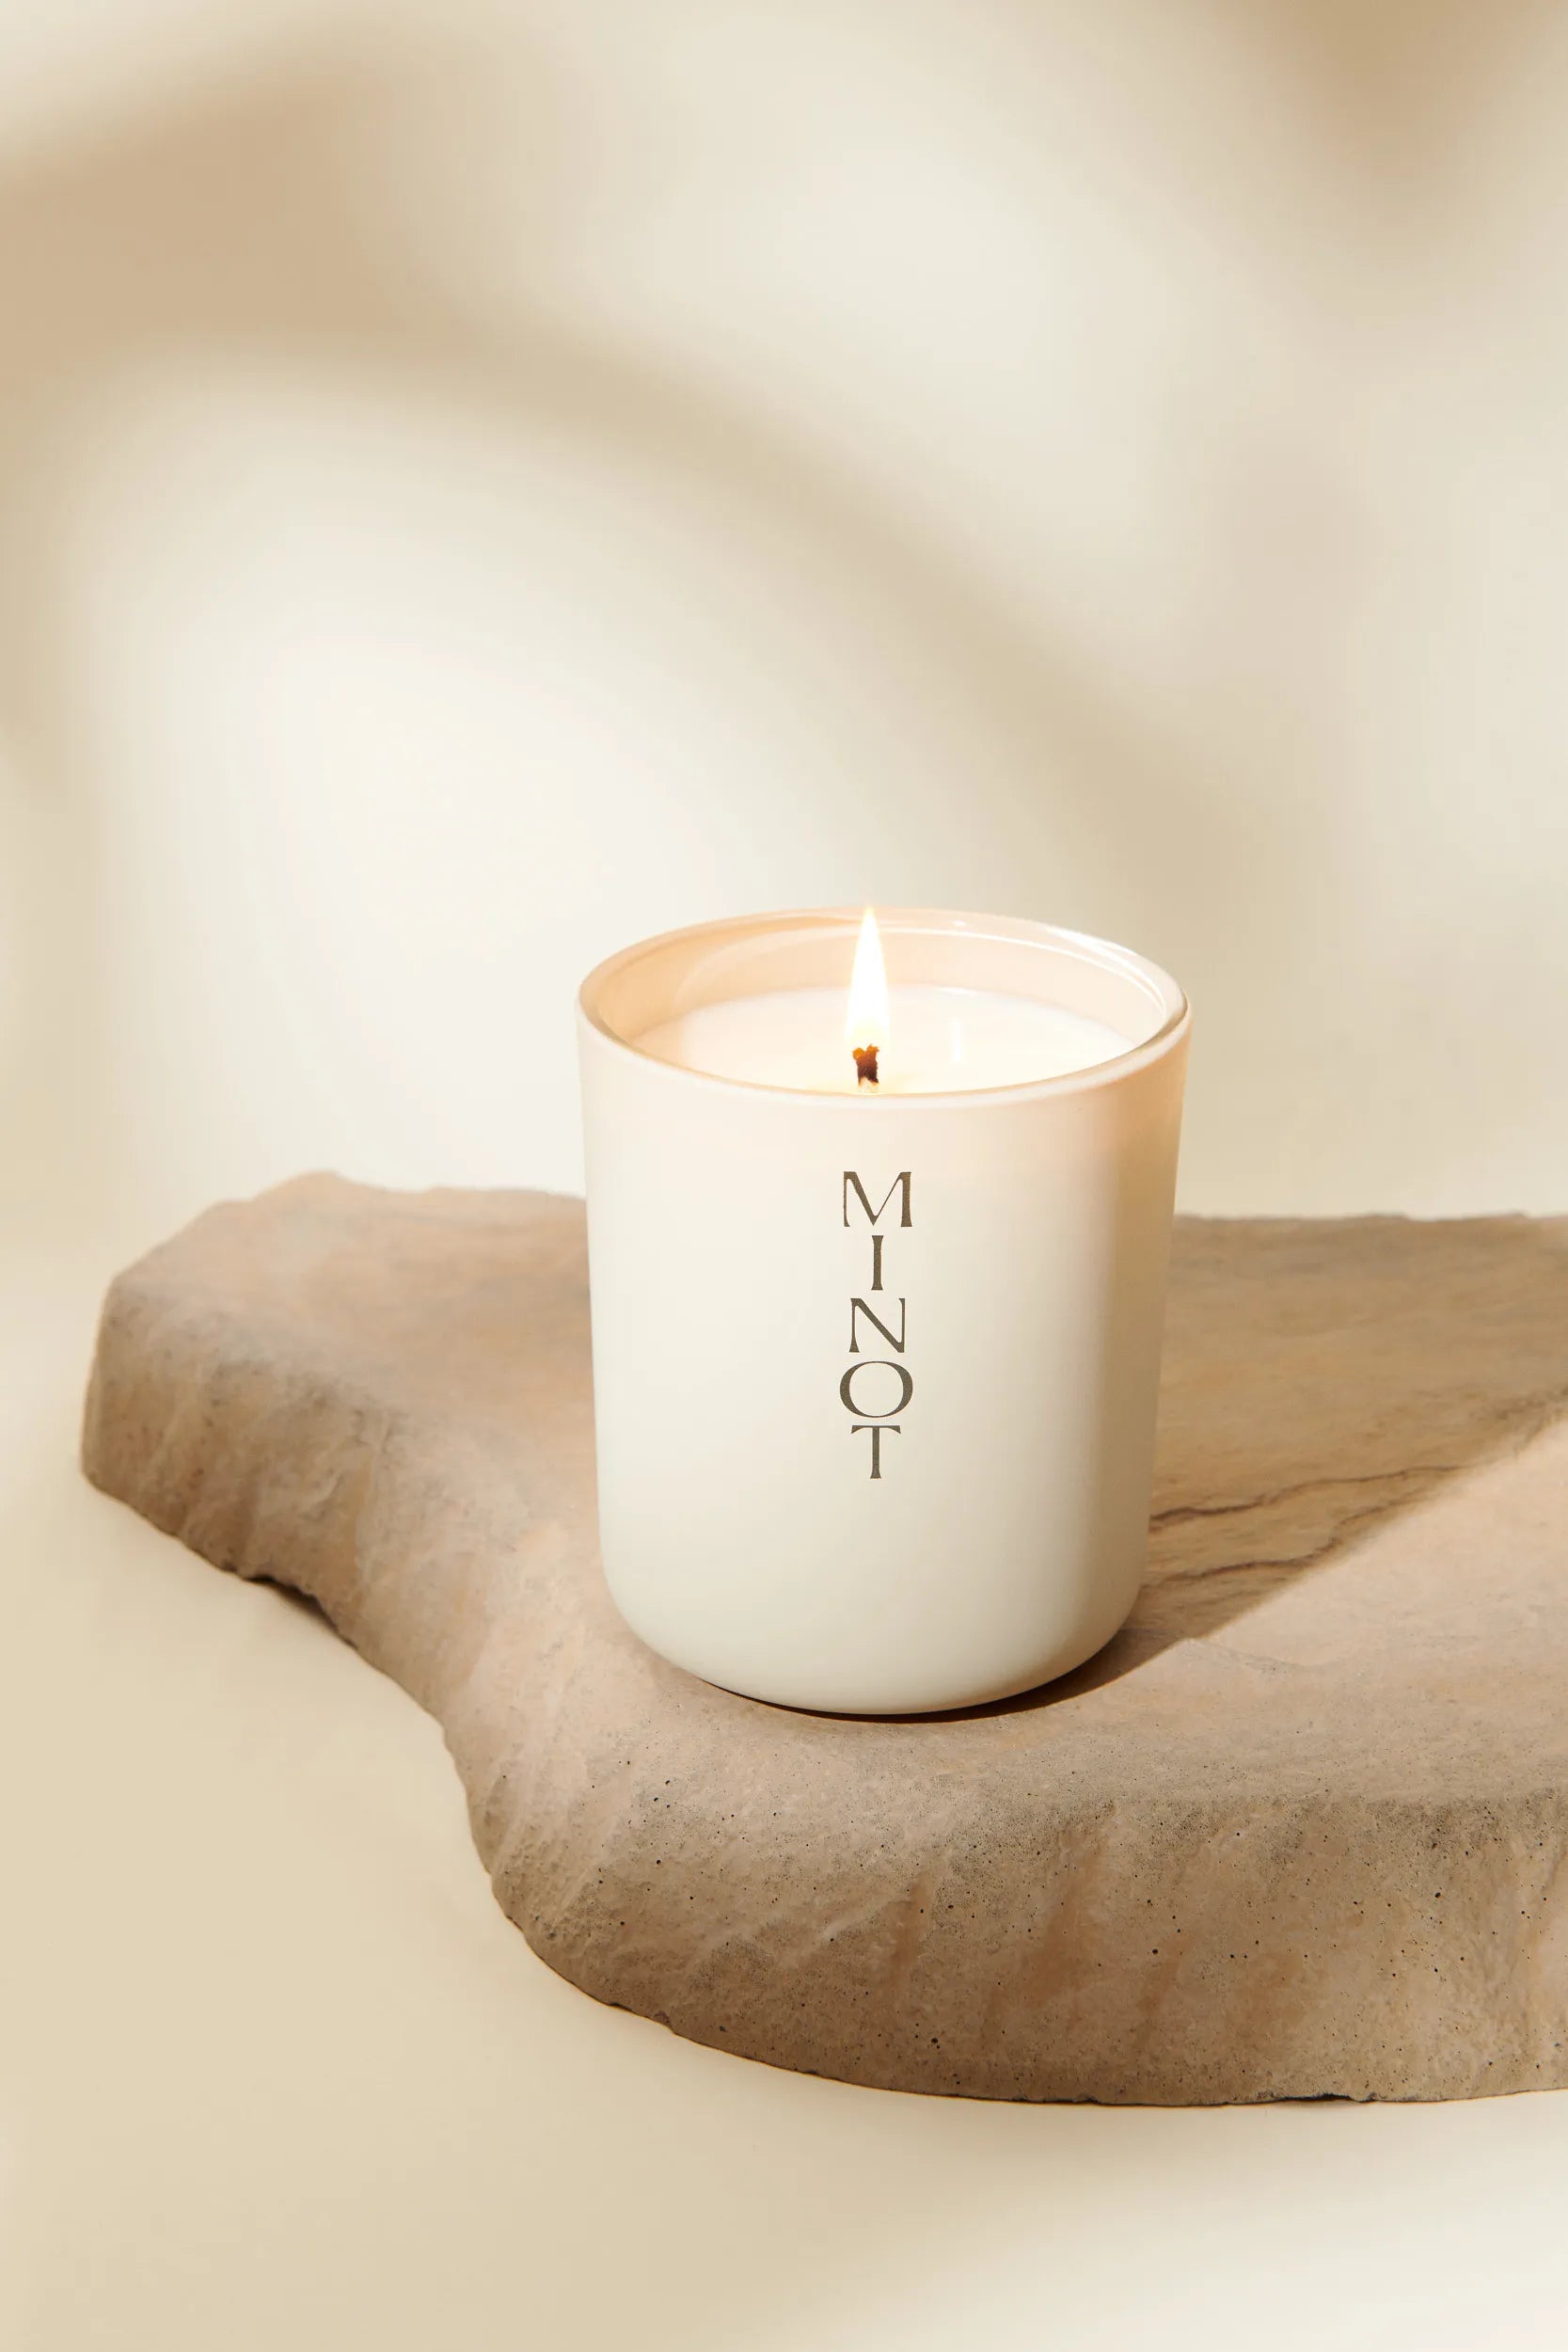 Luna is sultry jasmine scented candle in a minimalist glass with notes of mandarin and sandalwood